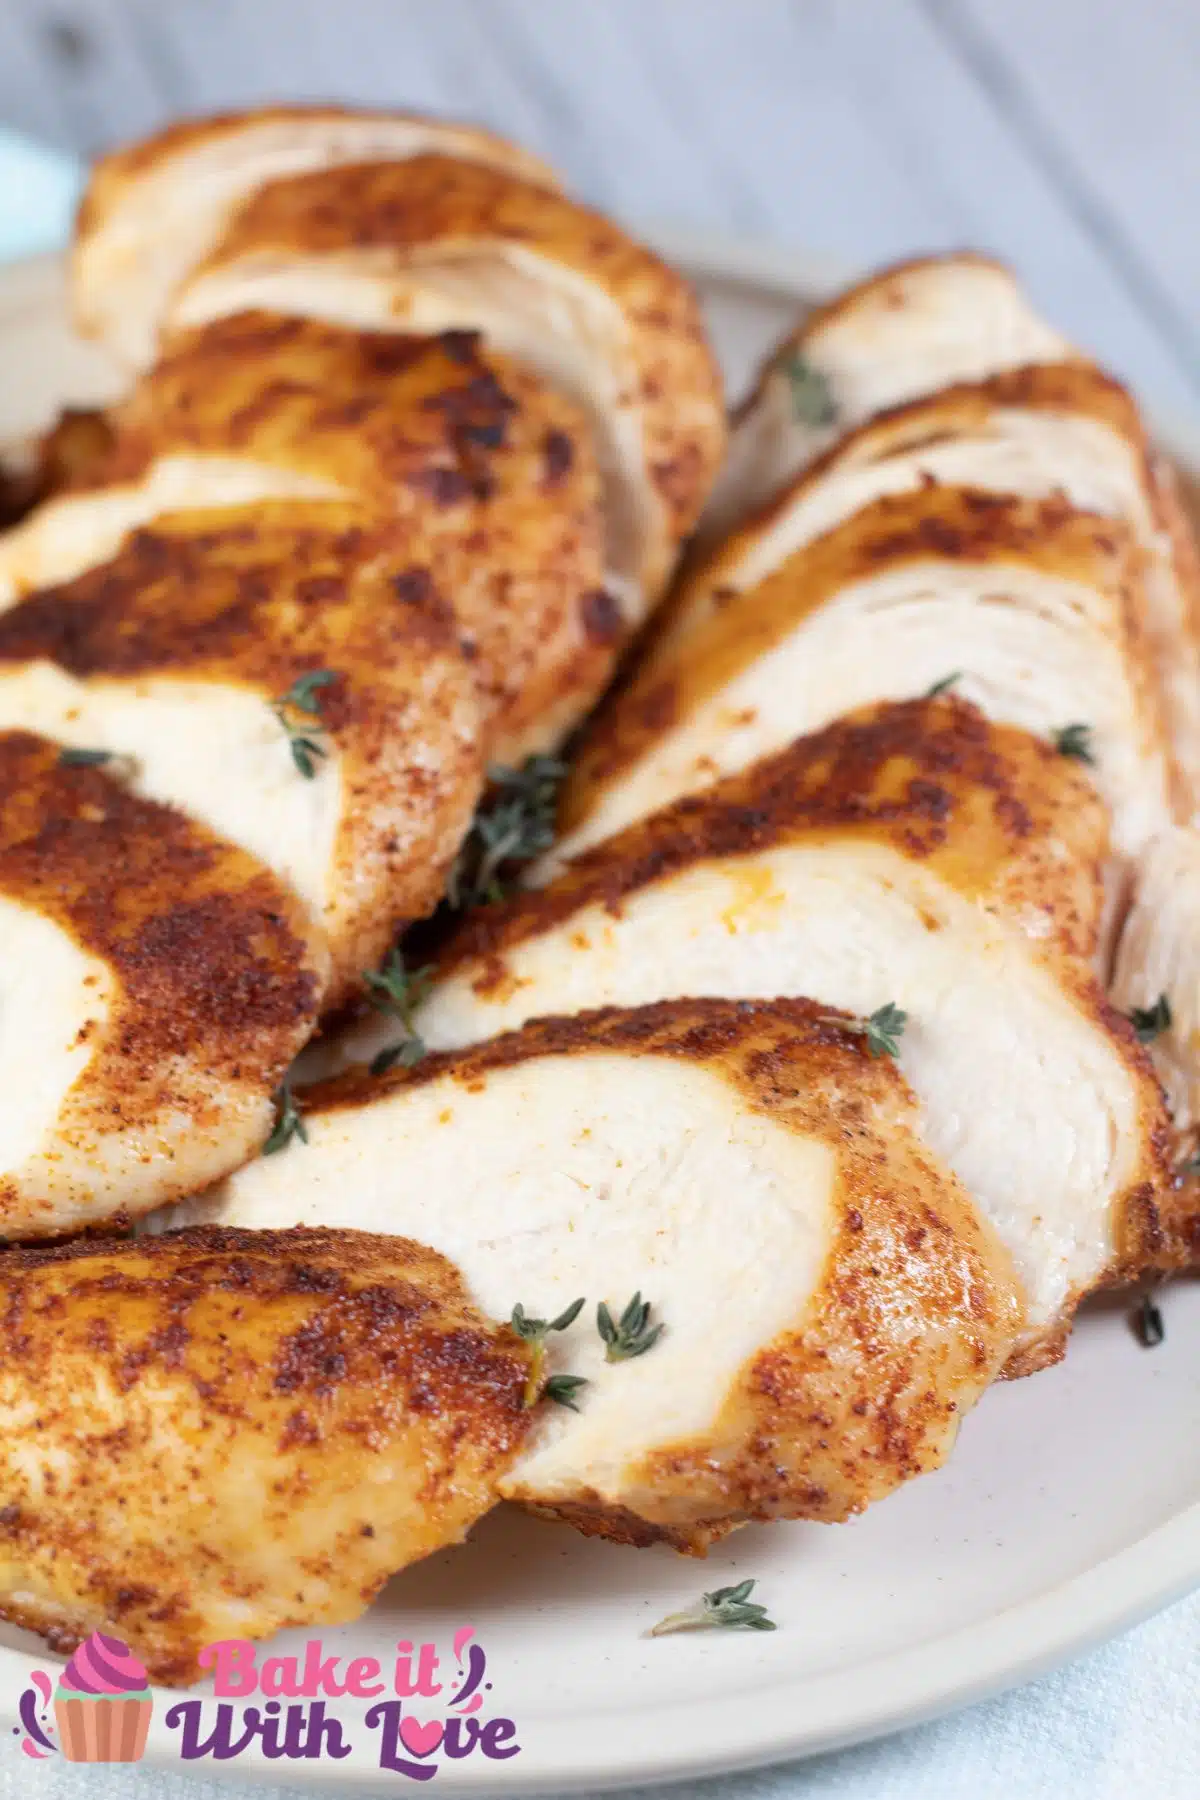 Tall image showing sliced boneless skinless air fryer chicken breasts.